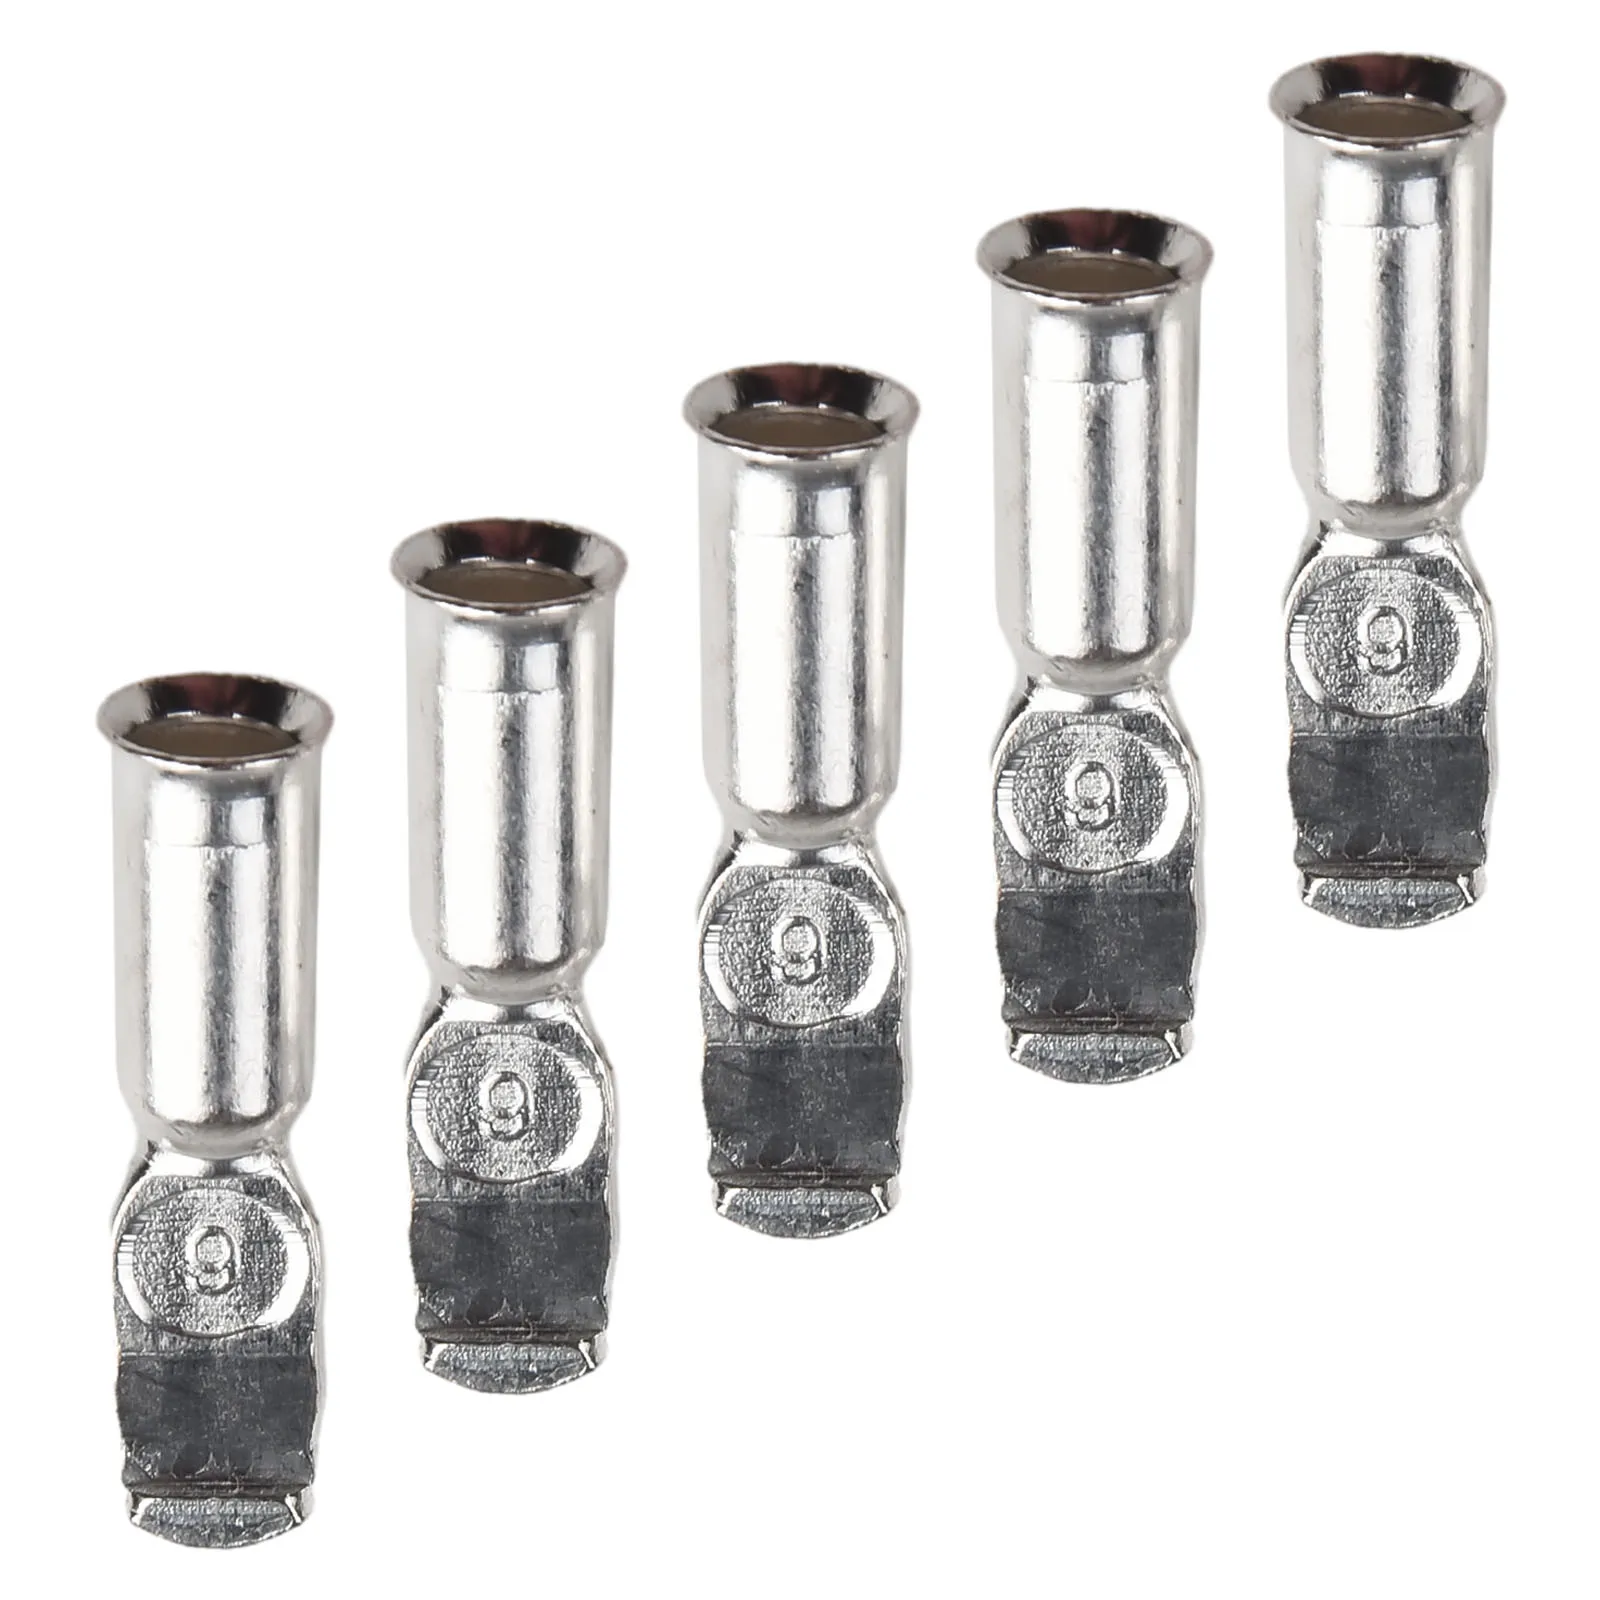 

10pcs Cable Terminal Anderson Plugs 4-12square 50A Cable Termination 7*6*4cm Fits 50A FOR Anderson Plug Terminals